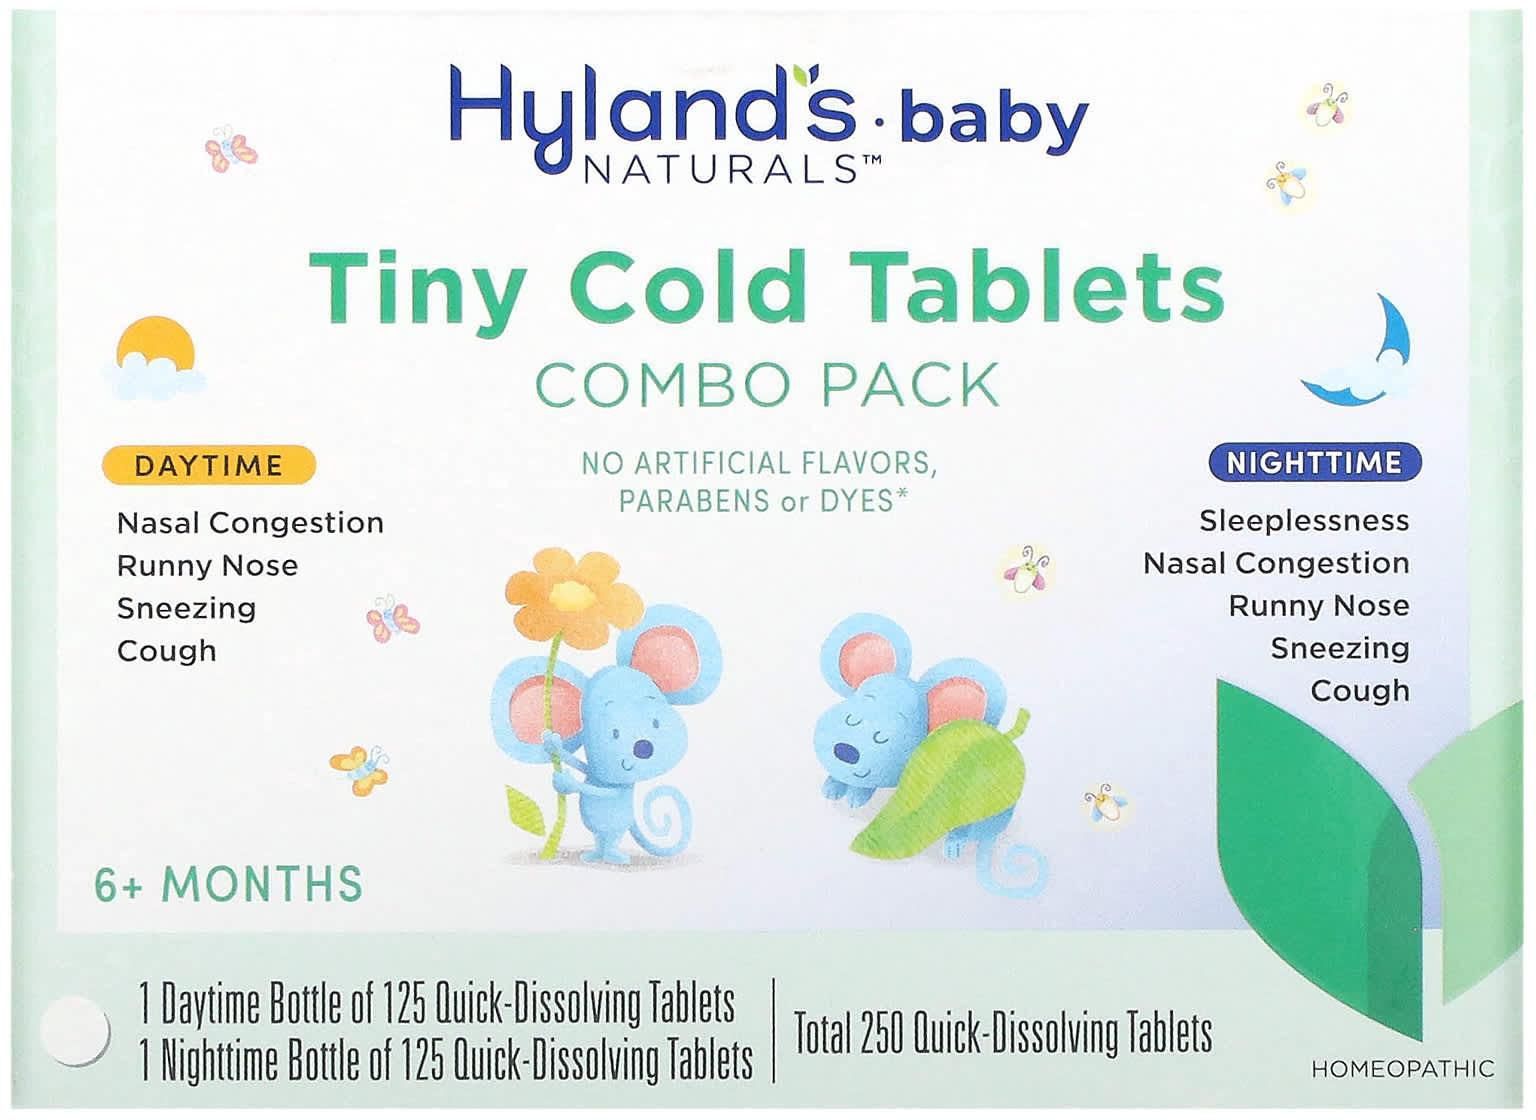 Hyland's‏, Baby, Tiny Cold Tablets Combo Pack, Daytime/Nighttime, 6+ Months, 250 Quick-Dissolving Tablets